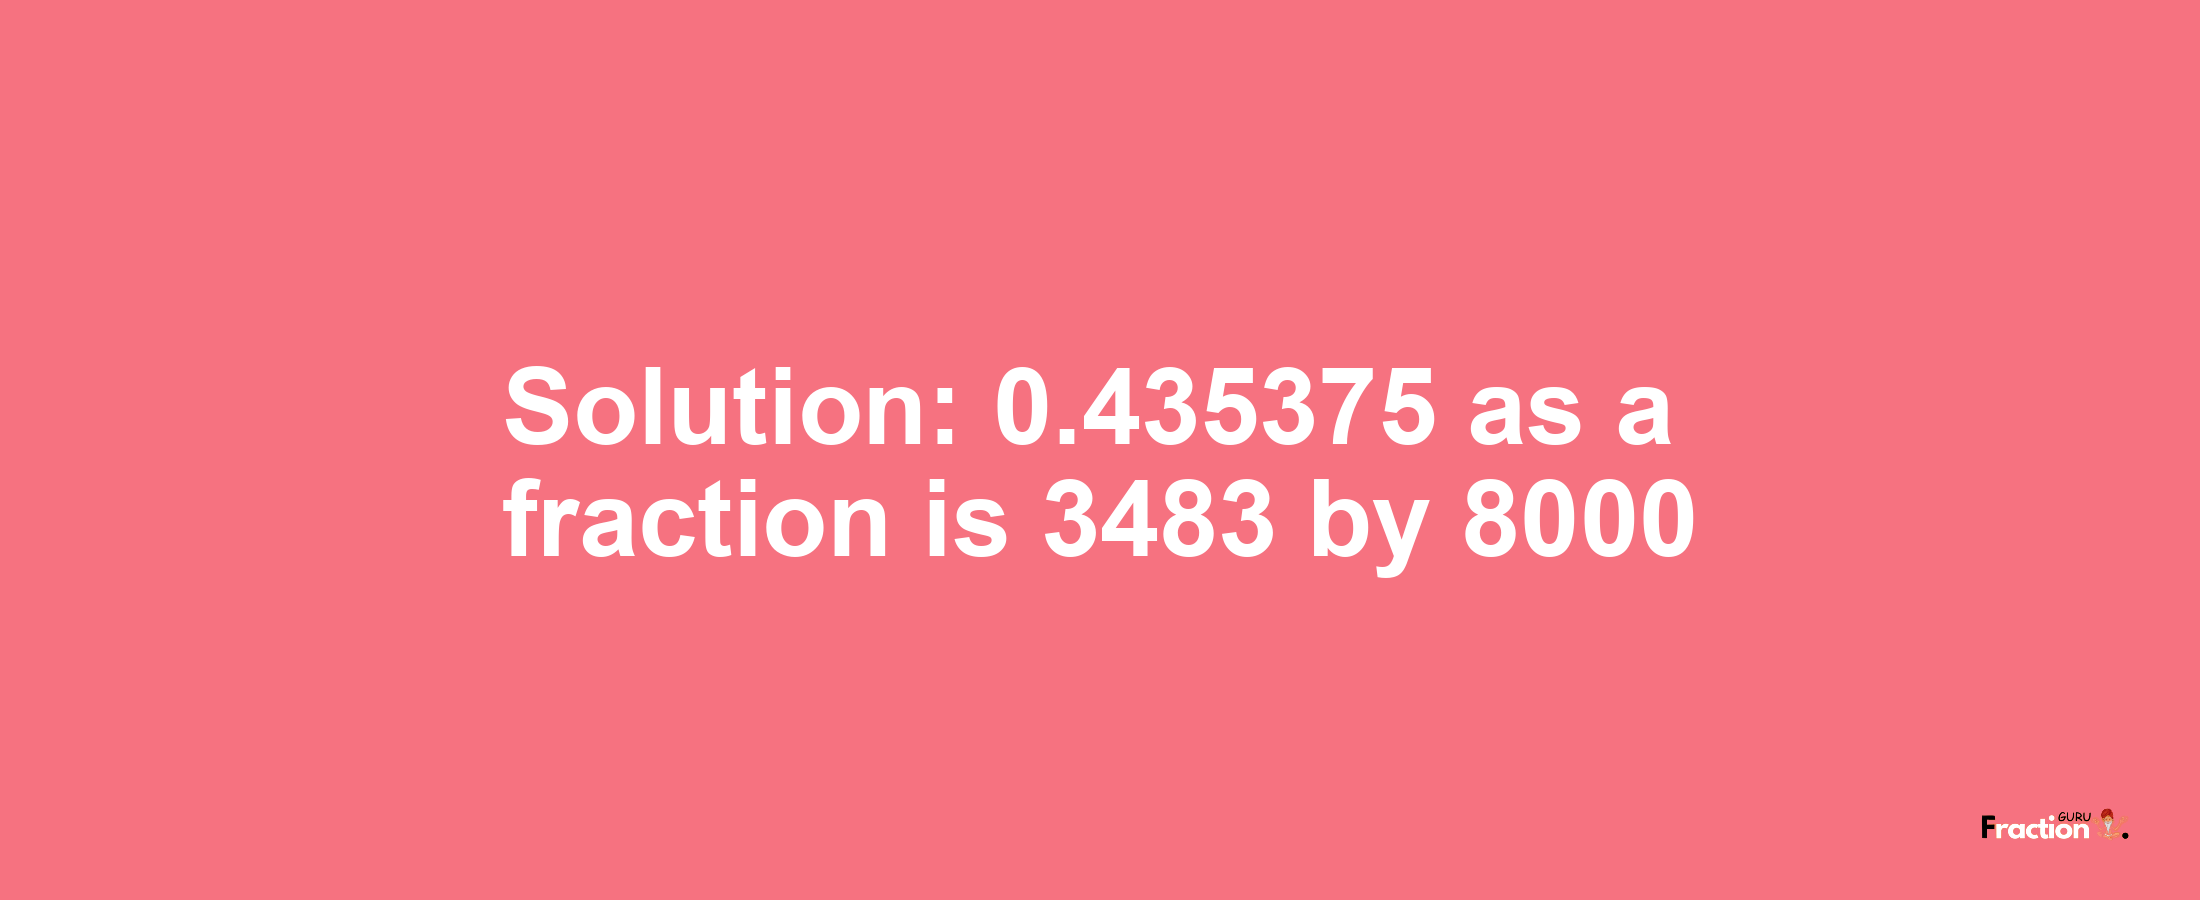 Solution:0.435375 as a fraction is 3483/8000